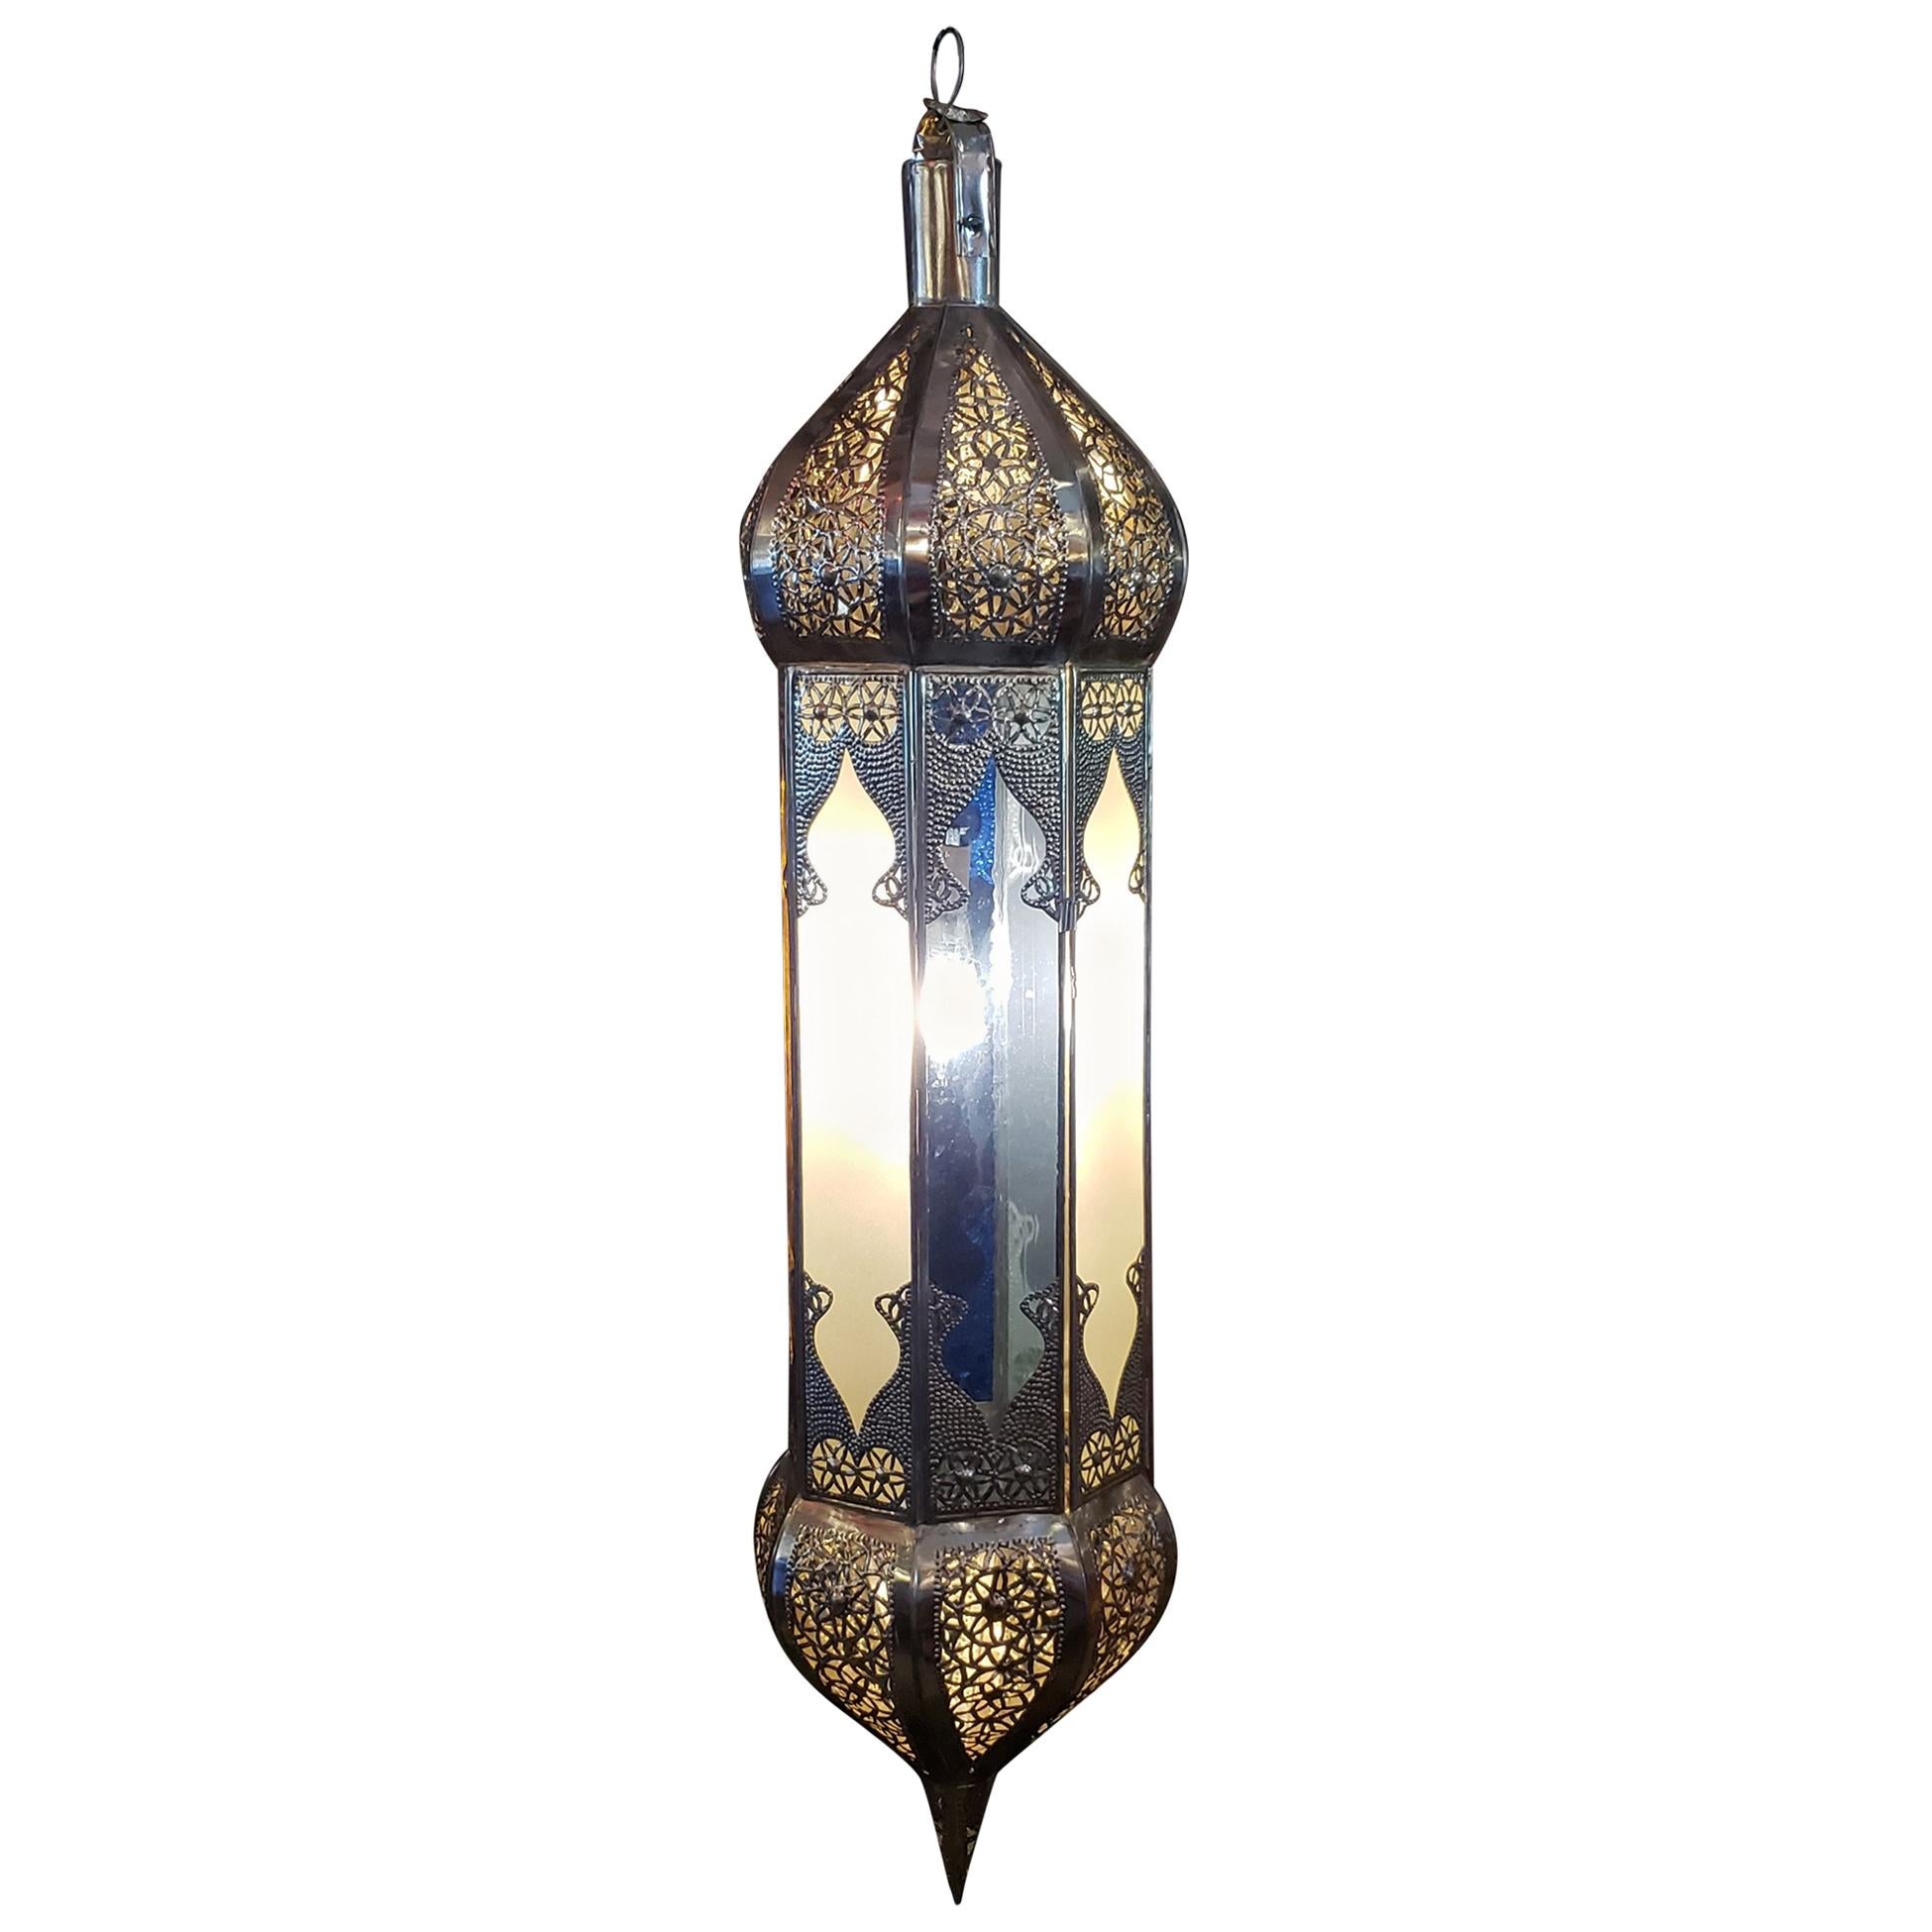 Balouta Handmade Moroccan Lantern, Yellow, Blue and Frosty White Glass For Sale